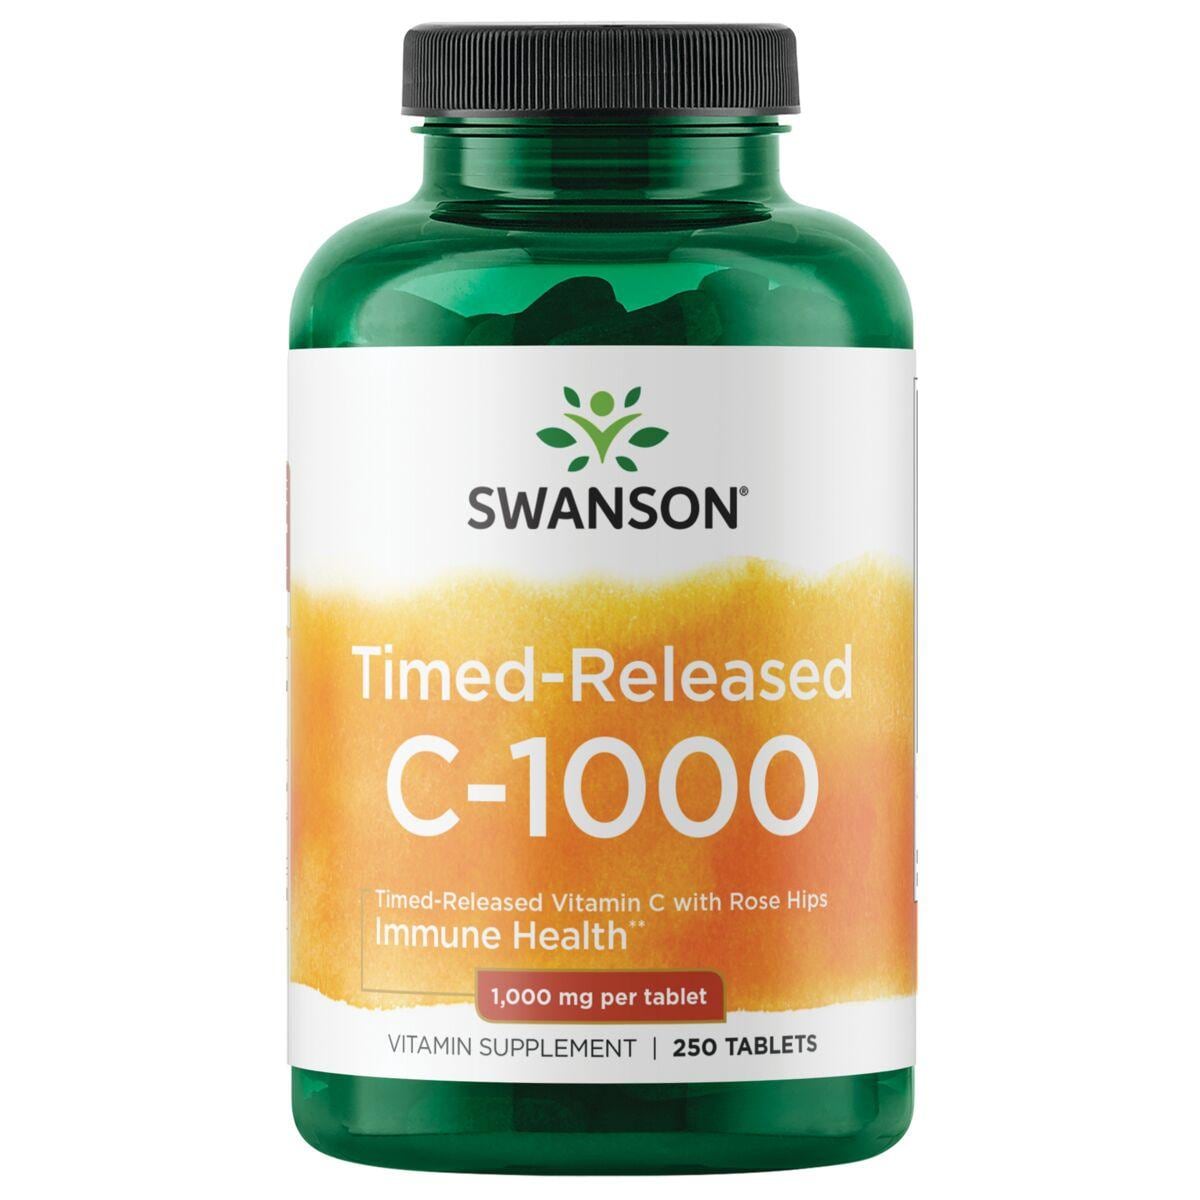 Swanson Premium Time-Released C-1000 with Rose Hips Vitamin | 1000 mg | 250 Tabs | Vitamin C